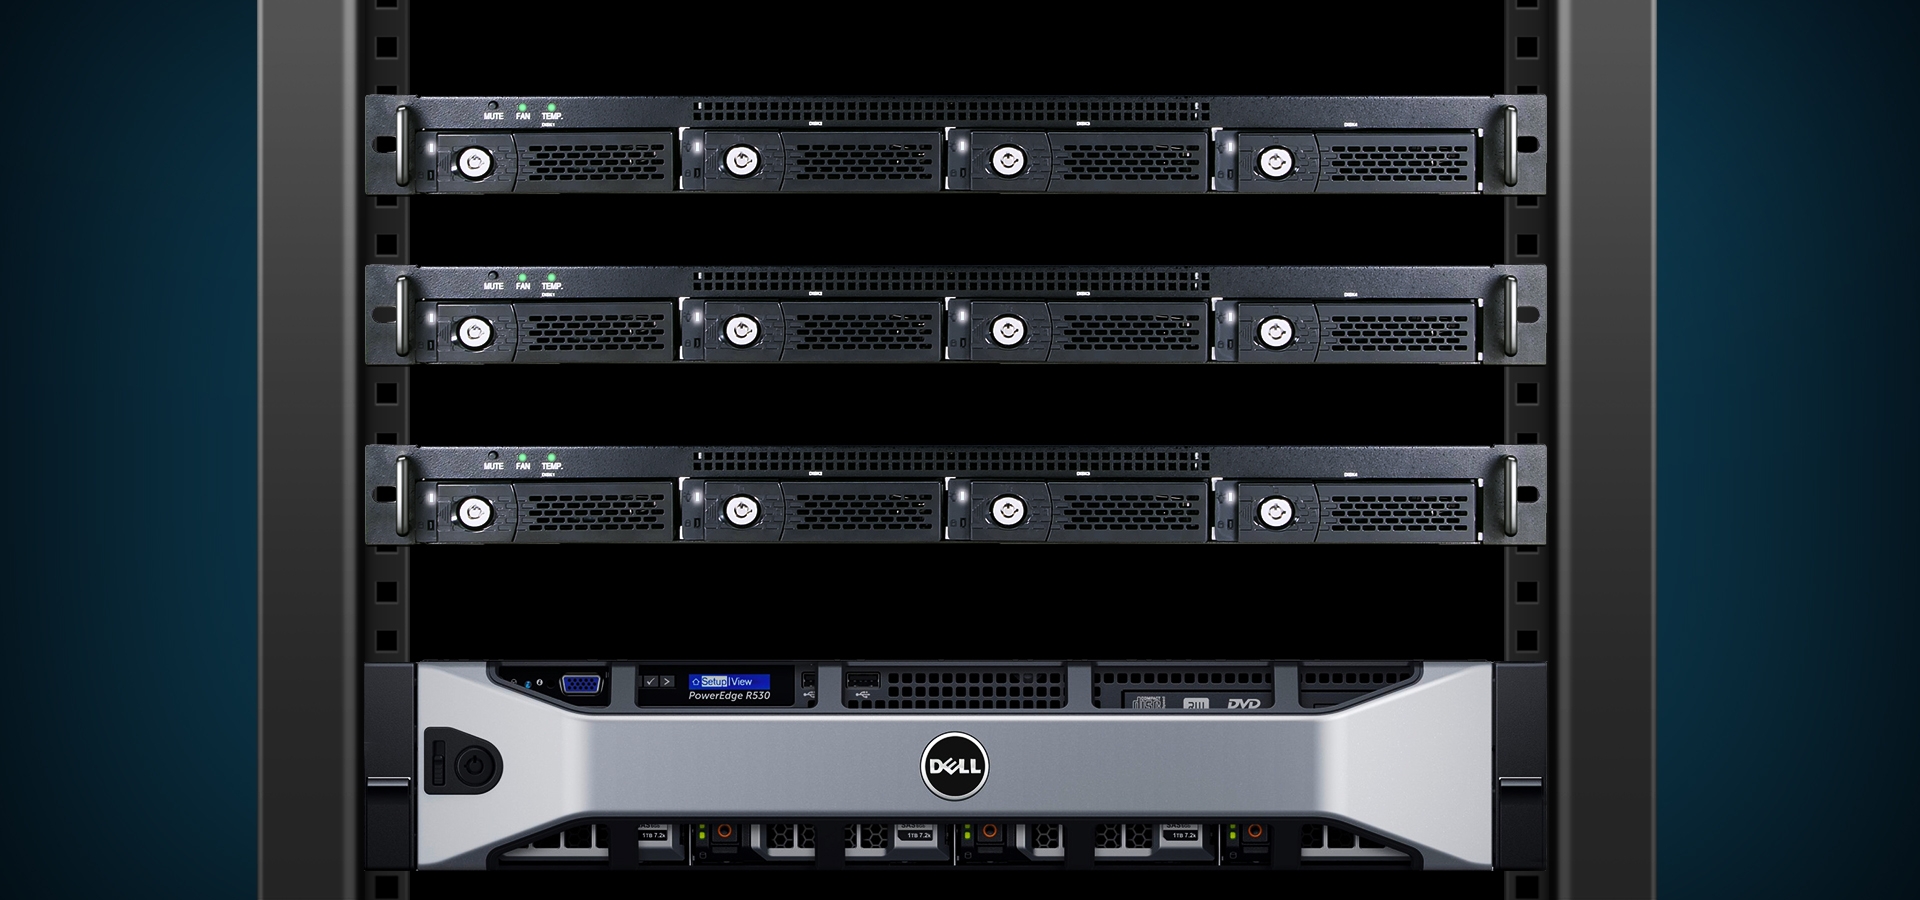 netstor ns370s is created to be aligned with the 19 rack cabinet easily